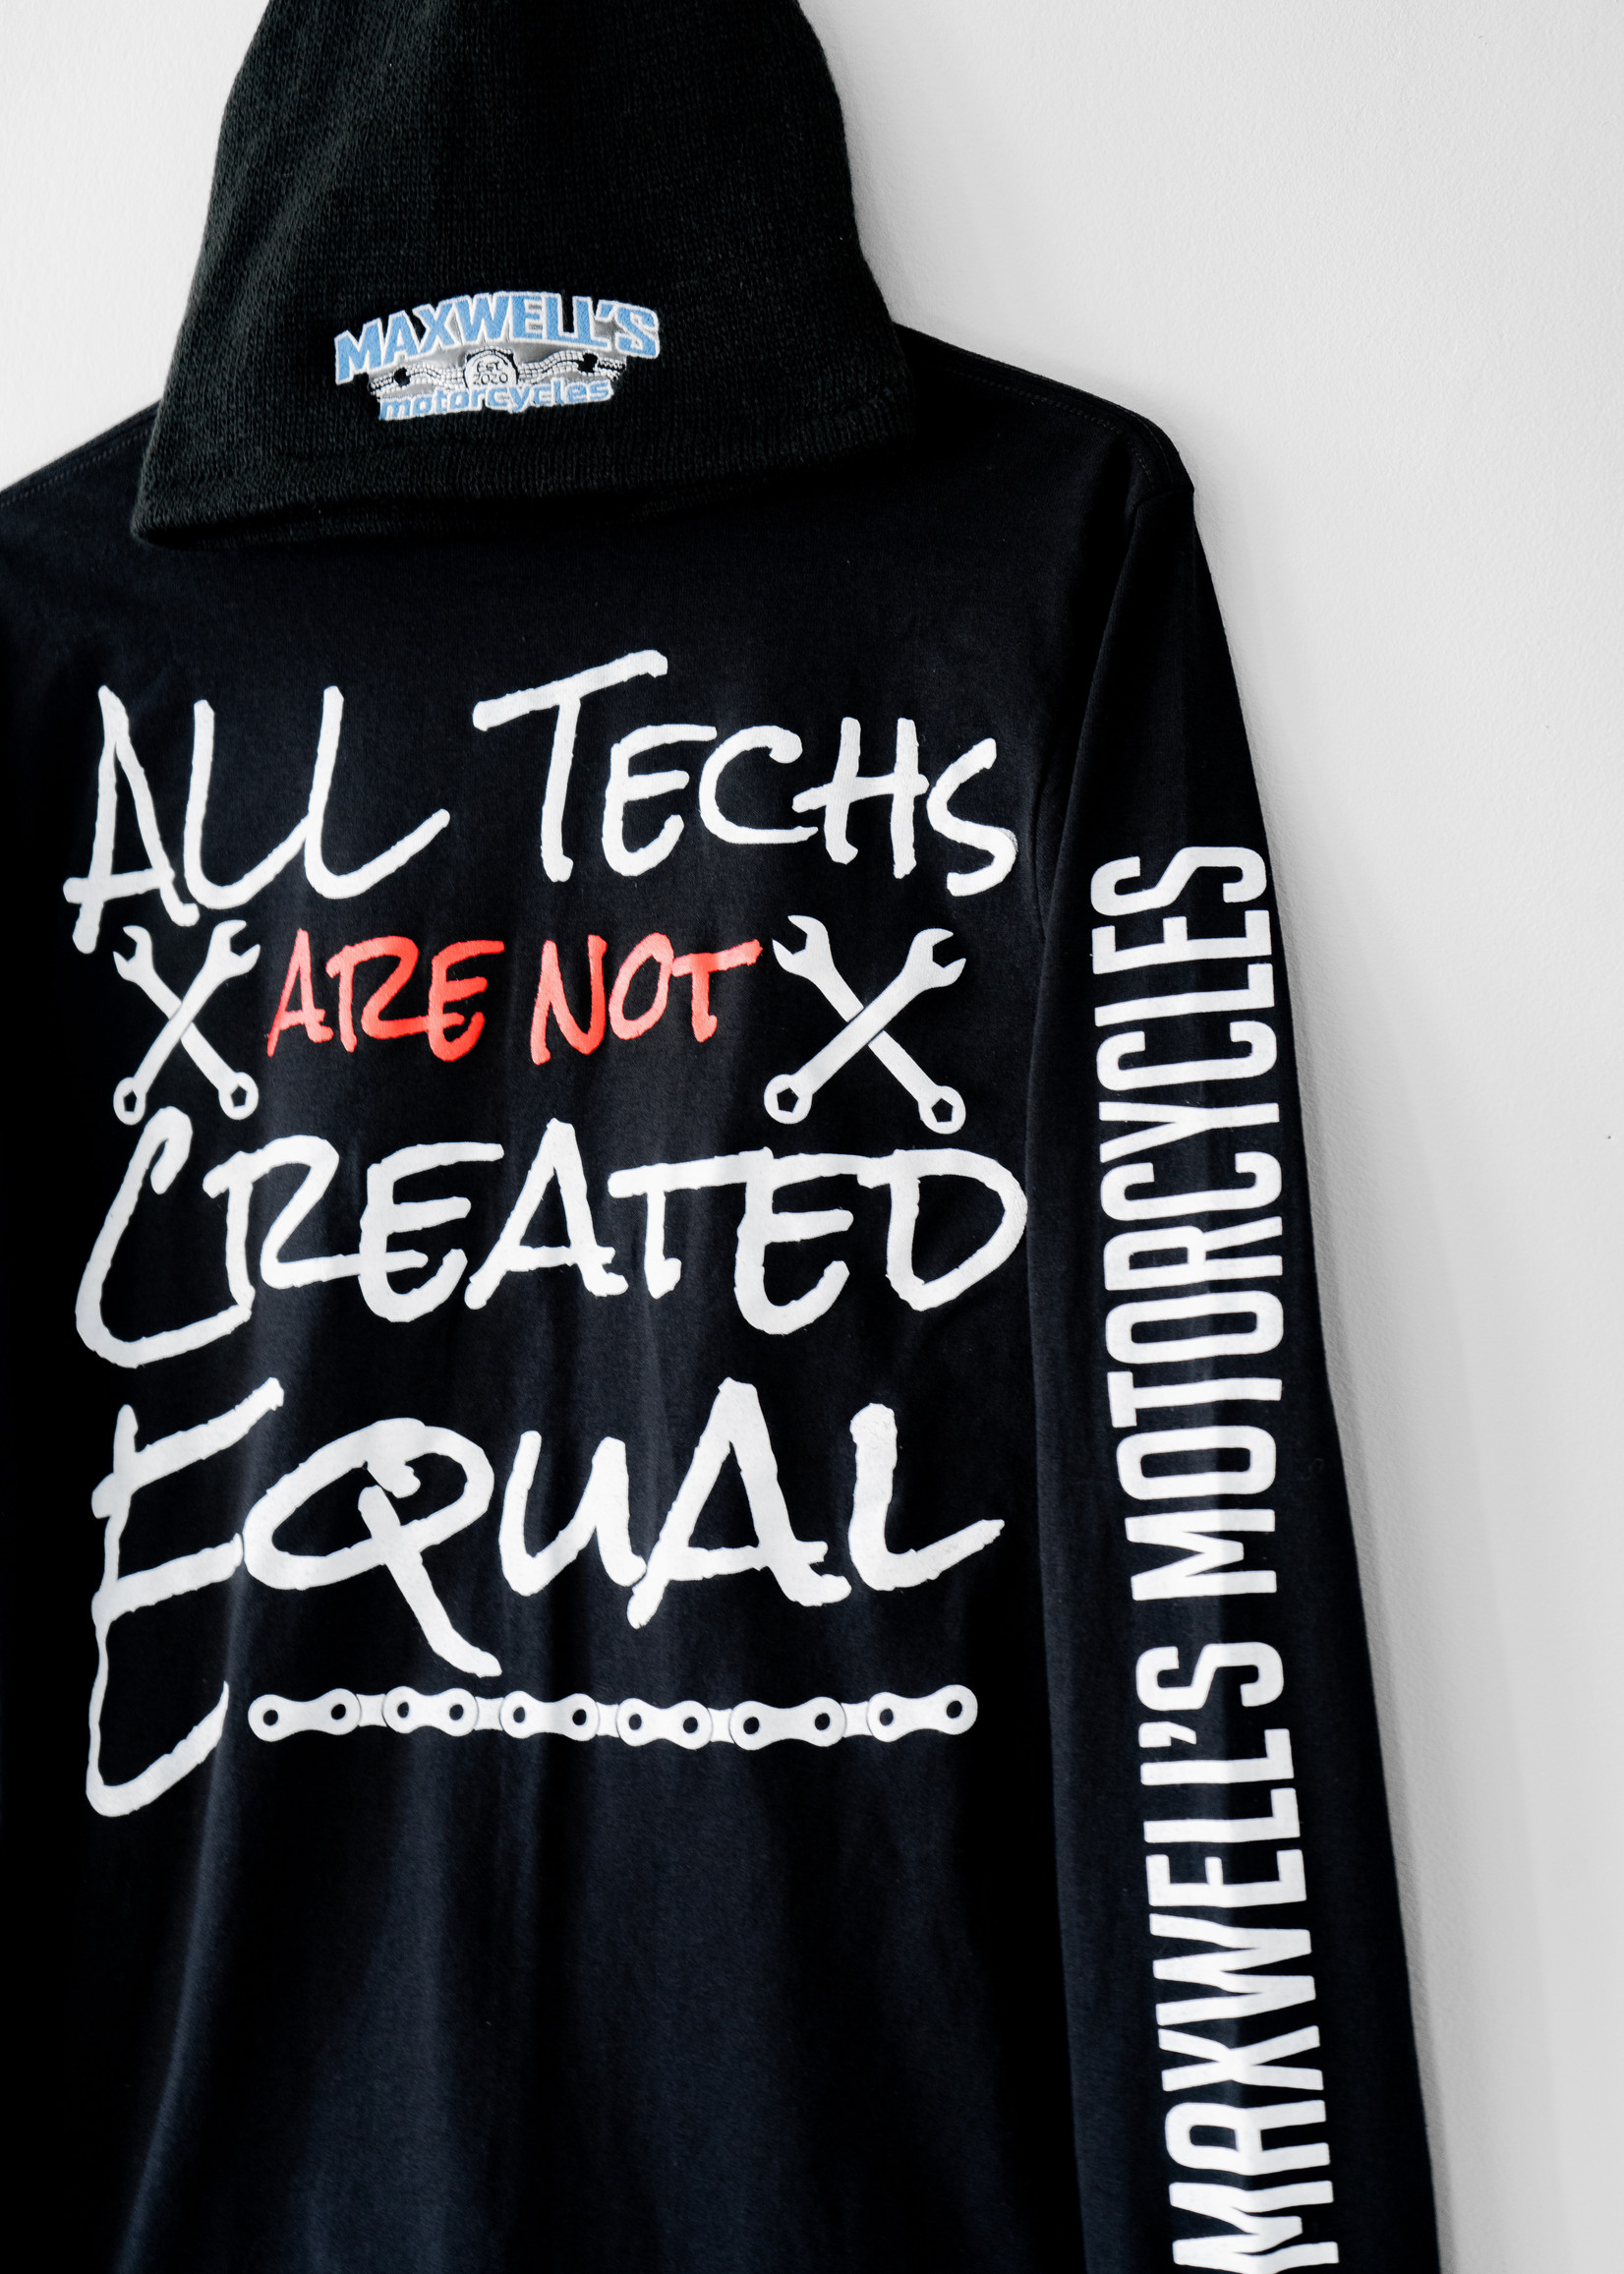 All Techs Are Not Created Equal